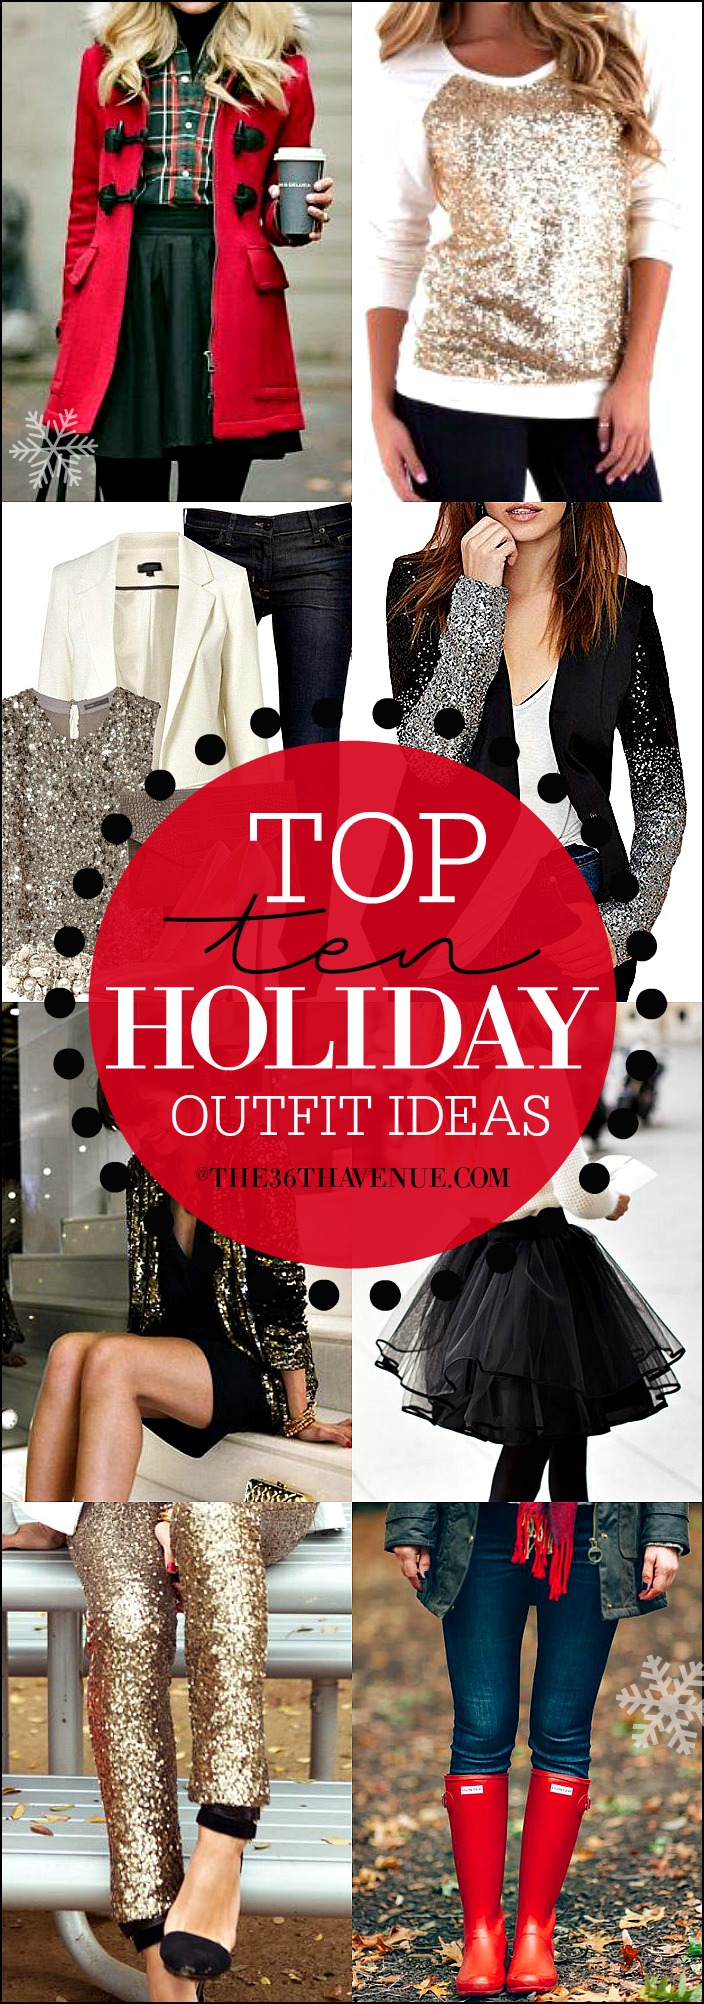 Holiday Outfit Ideas – Women's Fashion